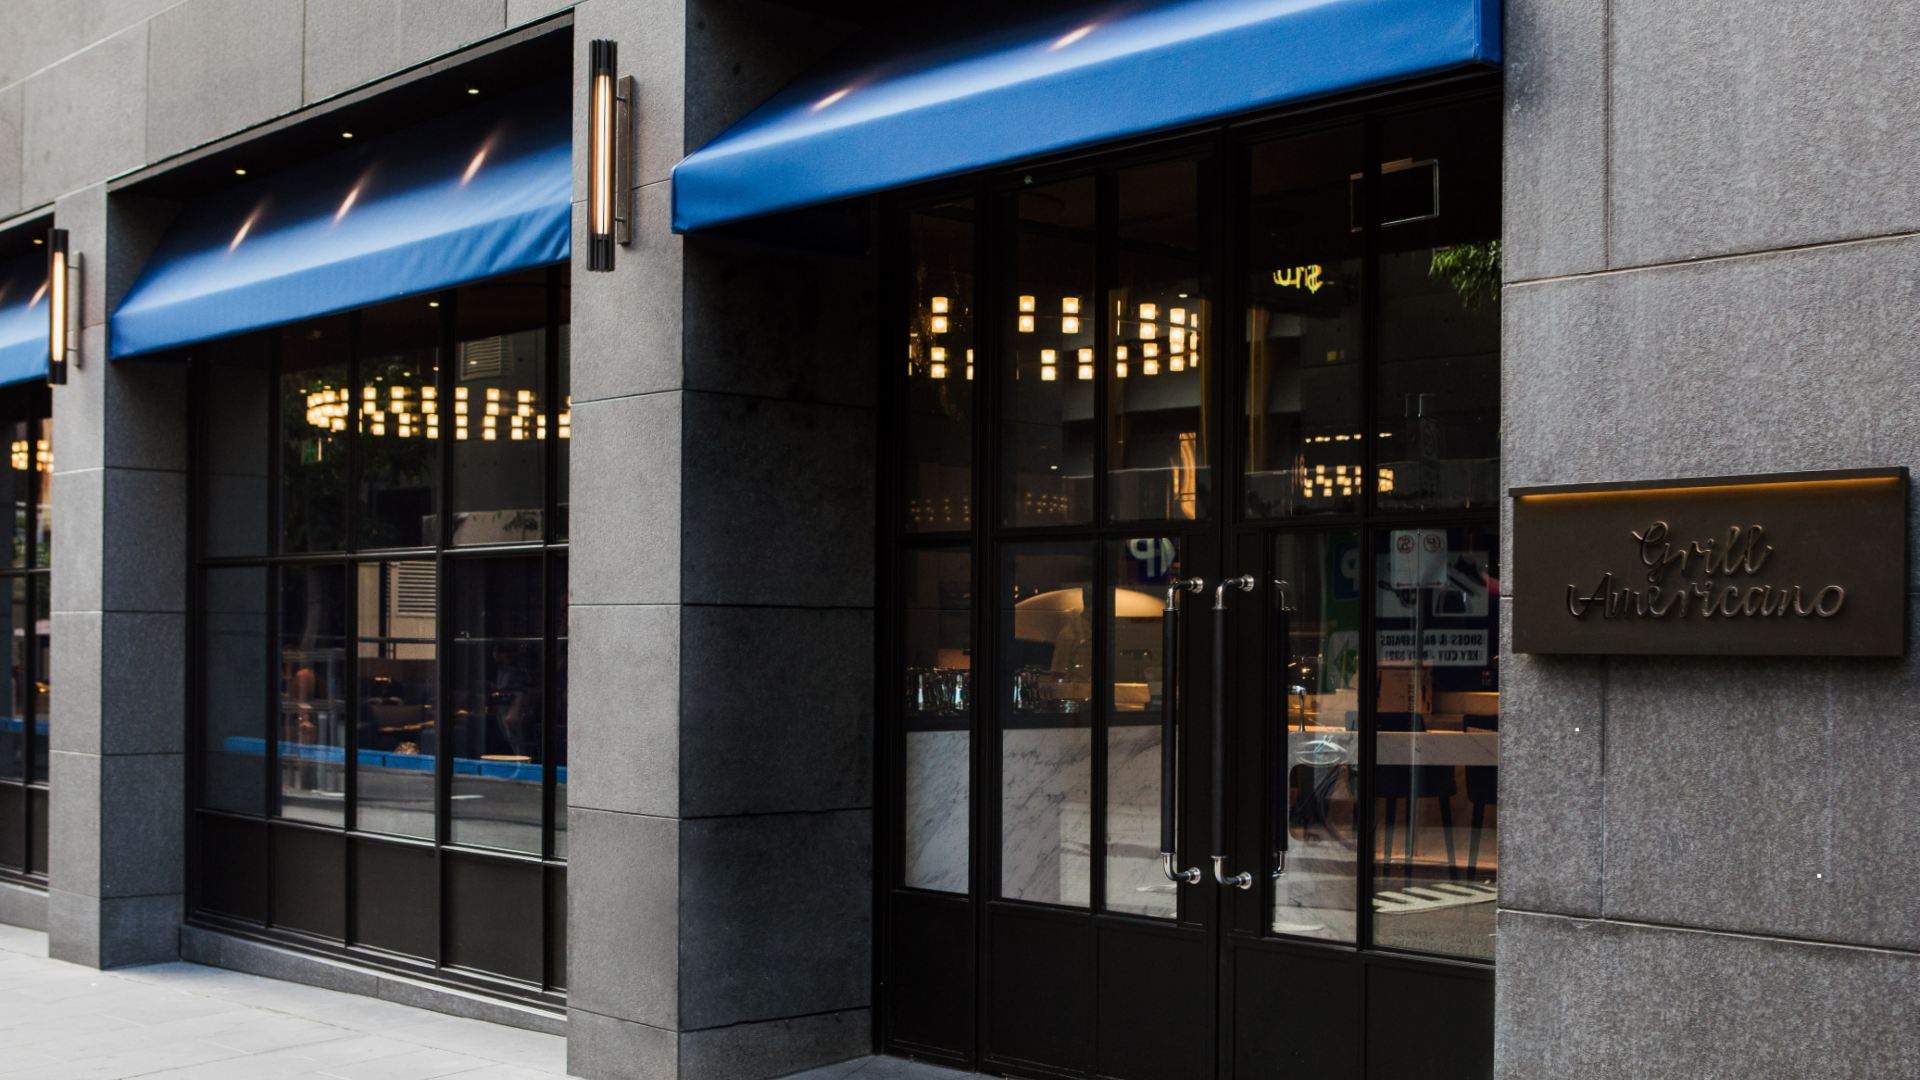 Chris Lucas' Highly-Anticipated Italian Restaurant Grill Americano Will Open This Month at 101 Collins Street